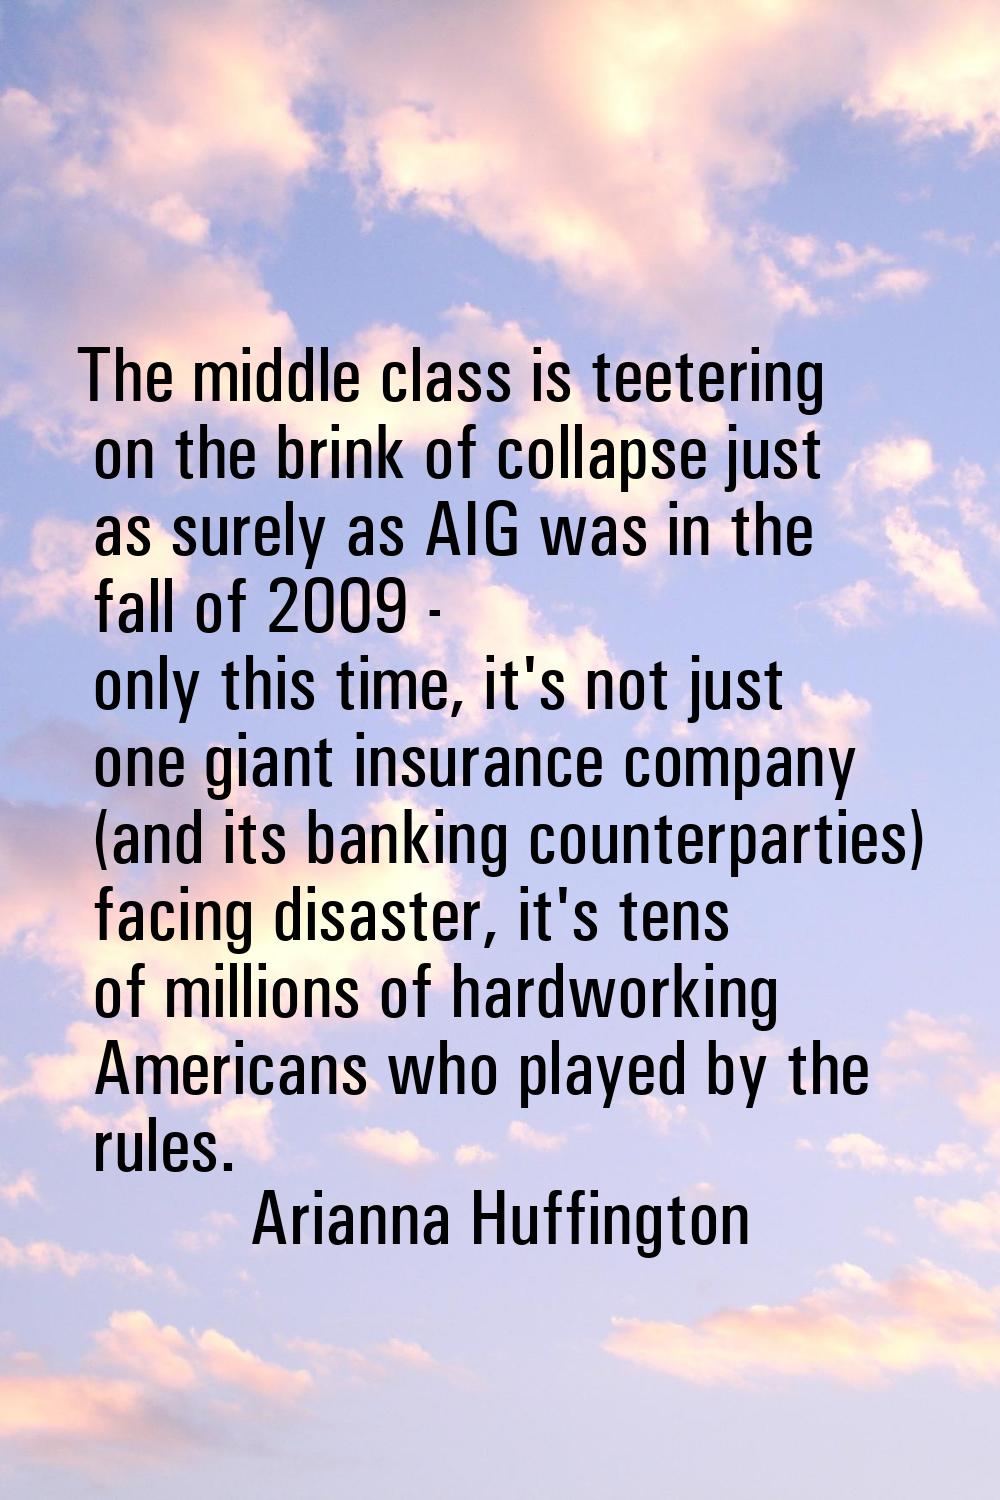 The middle class is teetering on the brink of collapse just as surely as AIG was in the fall of 200